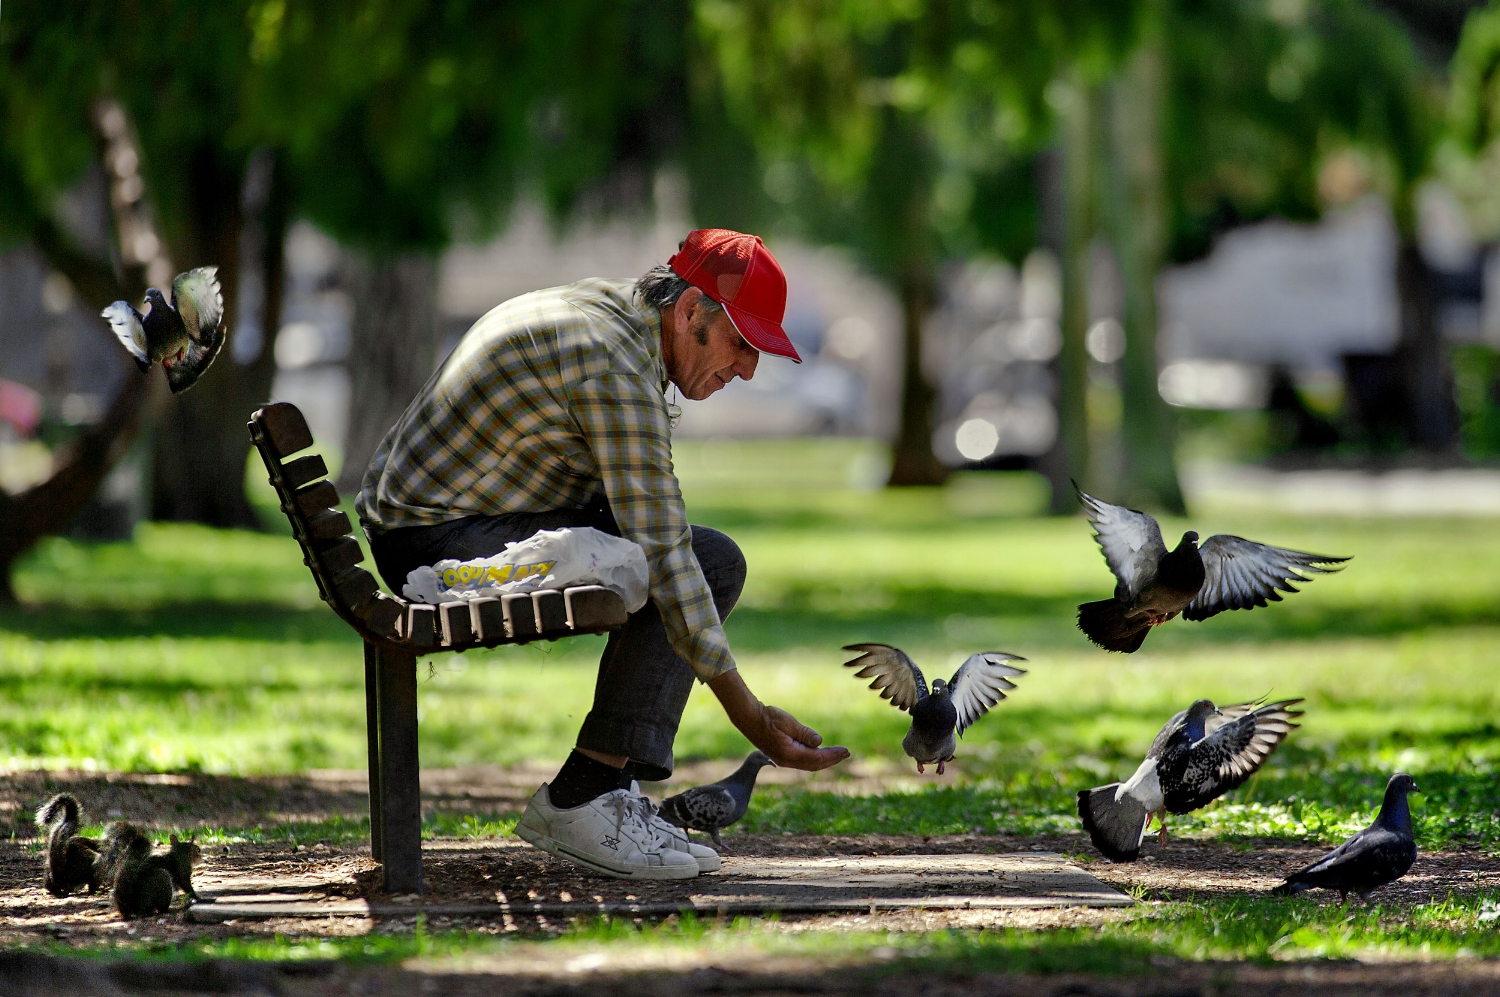  Michael Plevel of Rio Linda feeds the pigeons and squirrels at McKinley Park in Sacramento on Tuesday, August 31, 2010. 